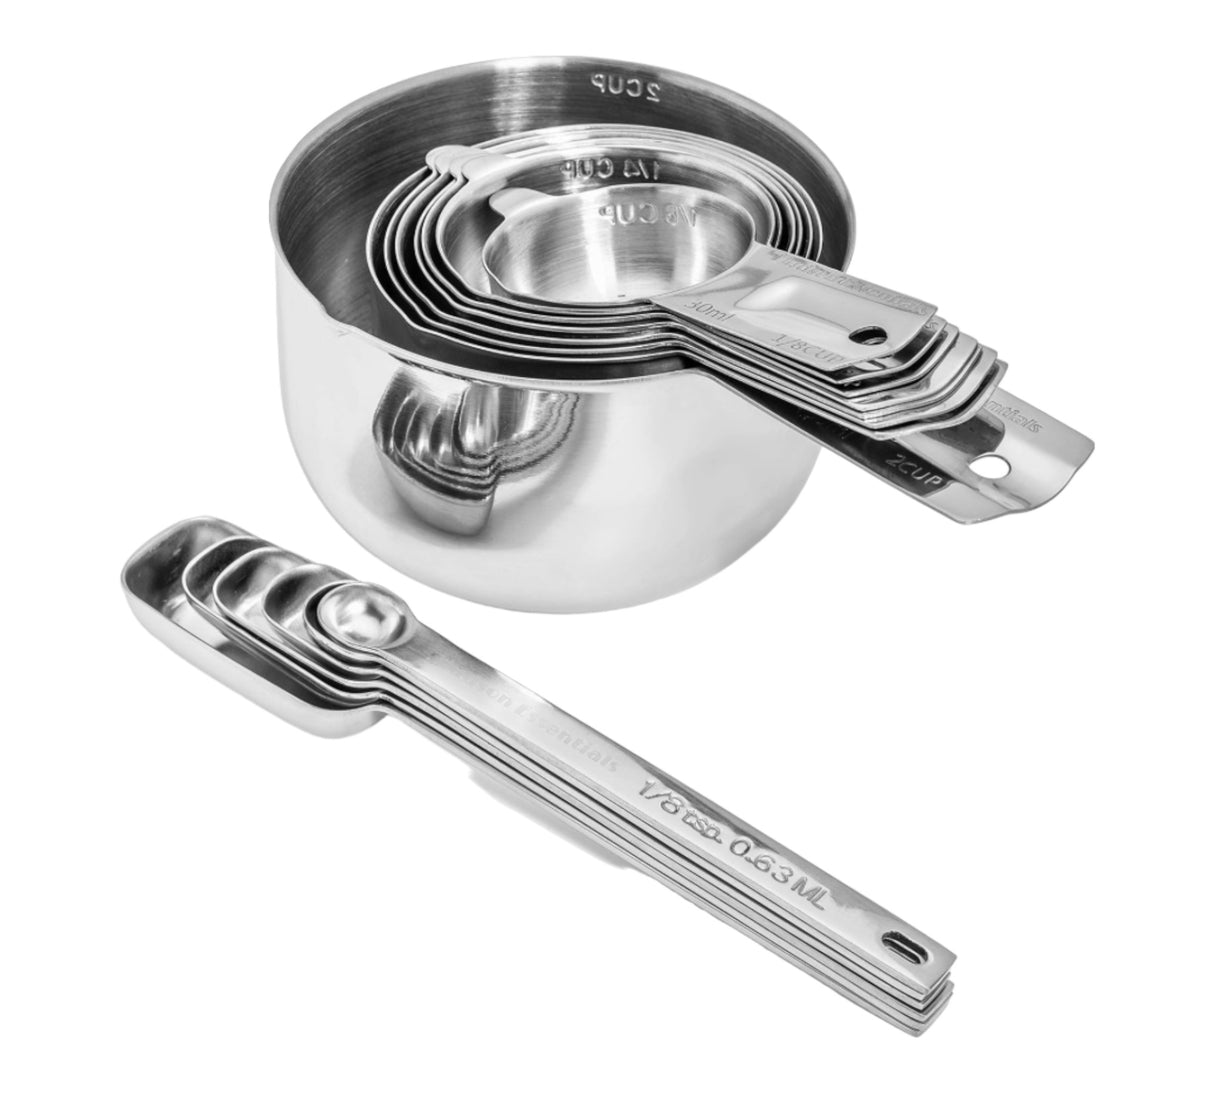 Personalized Measuring Cups and Spoons Premium Set - Stainless Steel